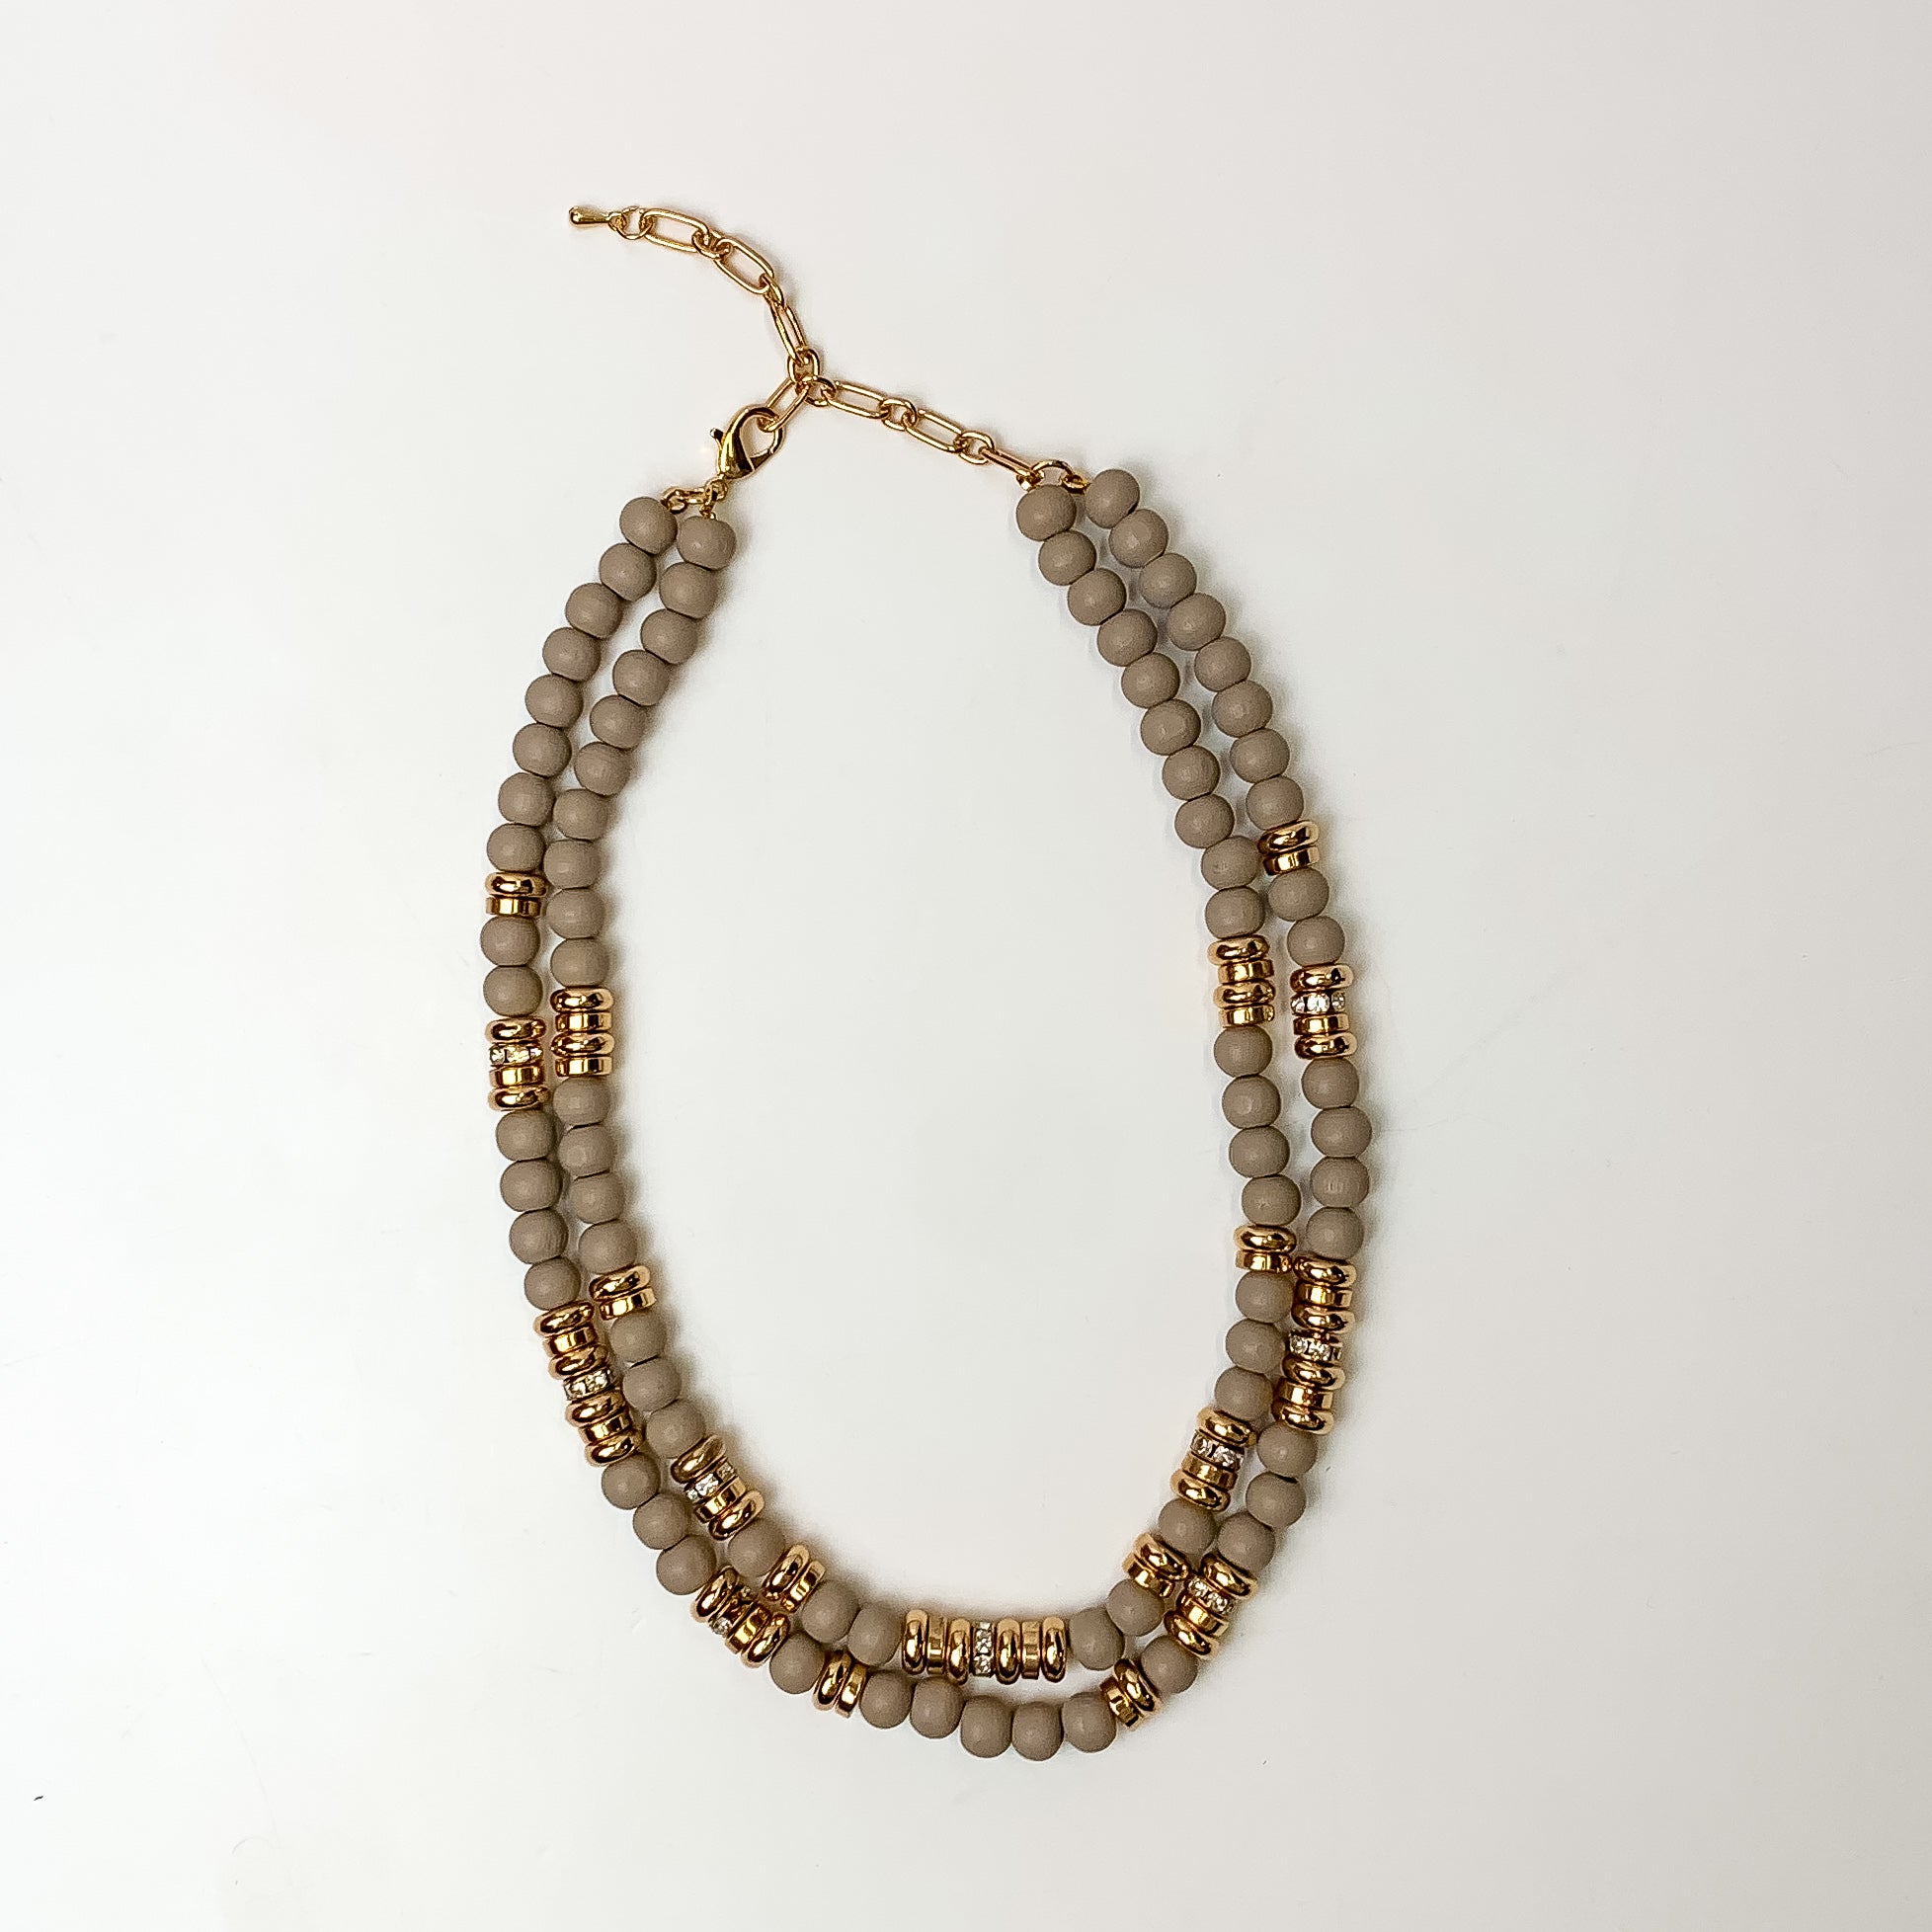 This layered necklace in gray has gold spacers. It is taken with a white background.